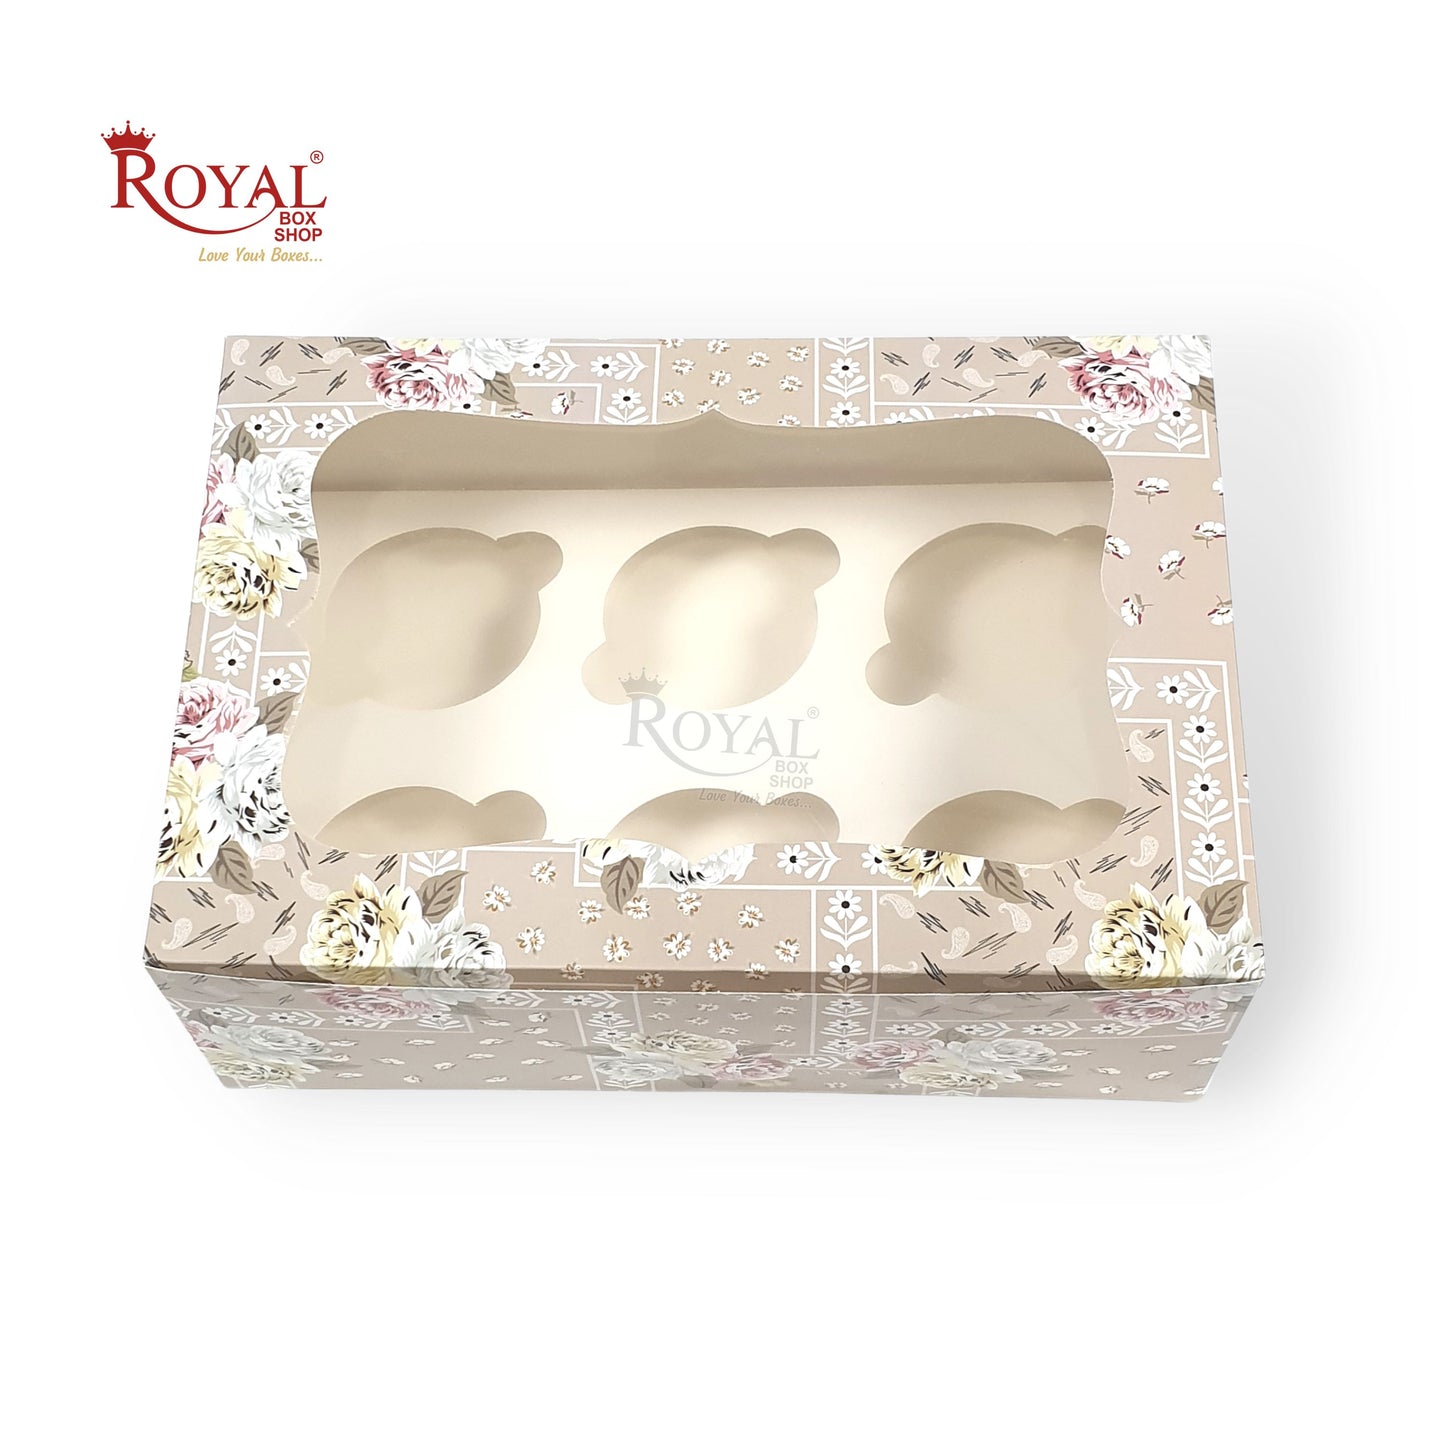 6pc Cupcake Box With Window I Size 10"x6.75"x3.5" I Flower Print I Perfect for Cupcakes, cookies